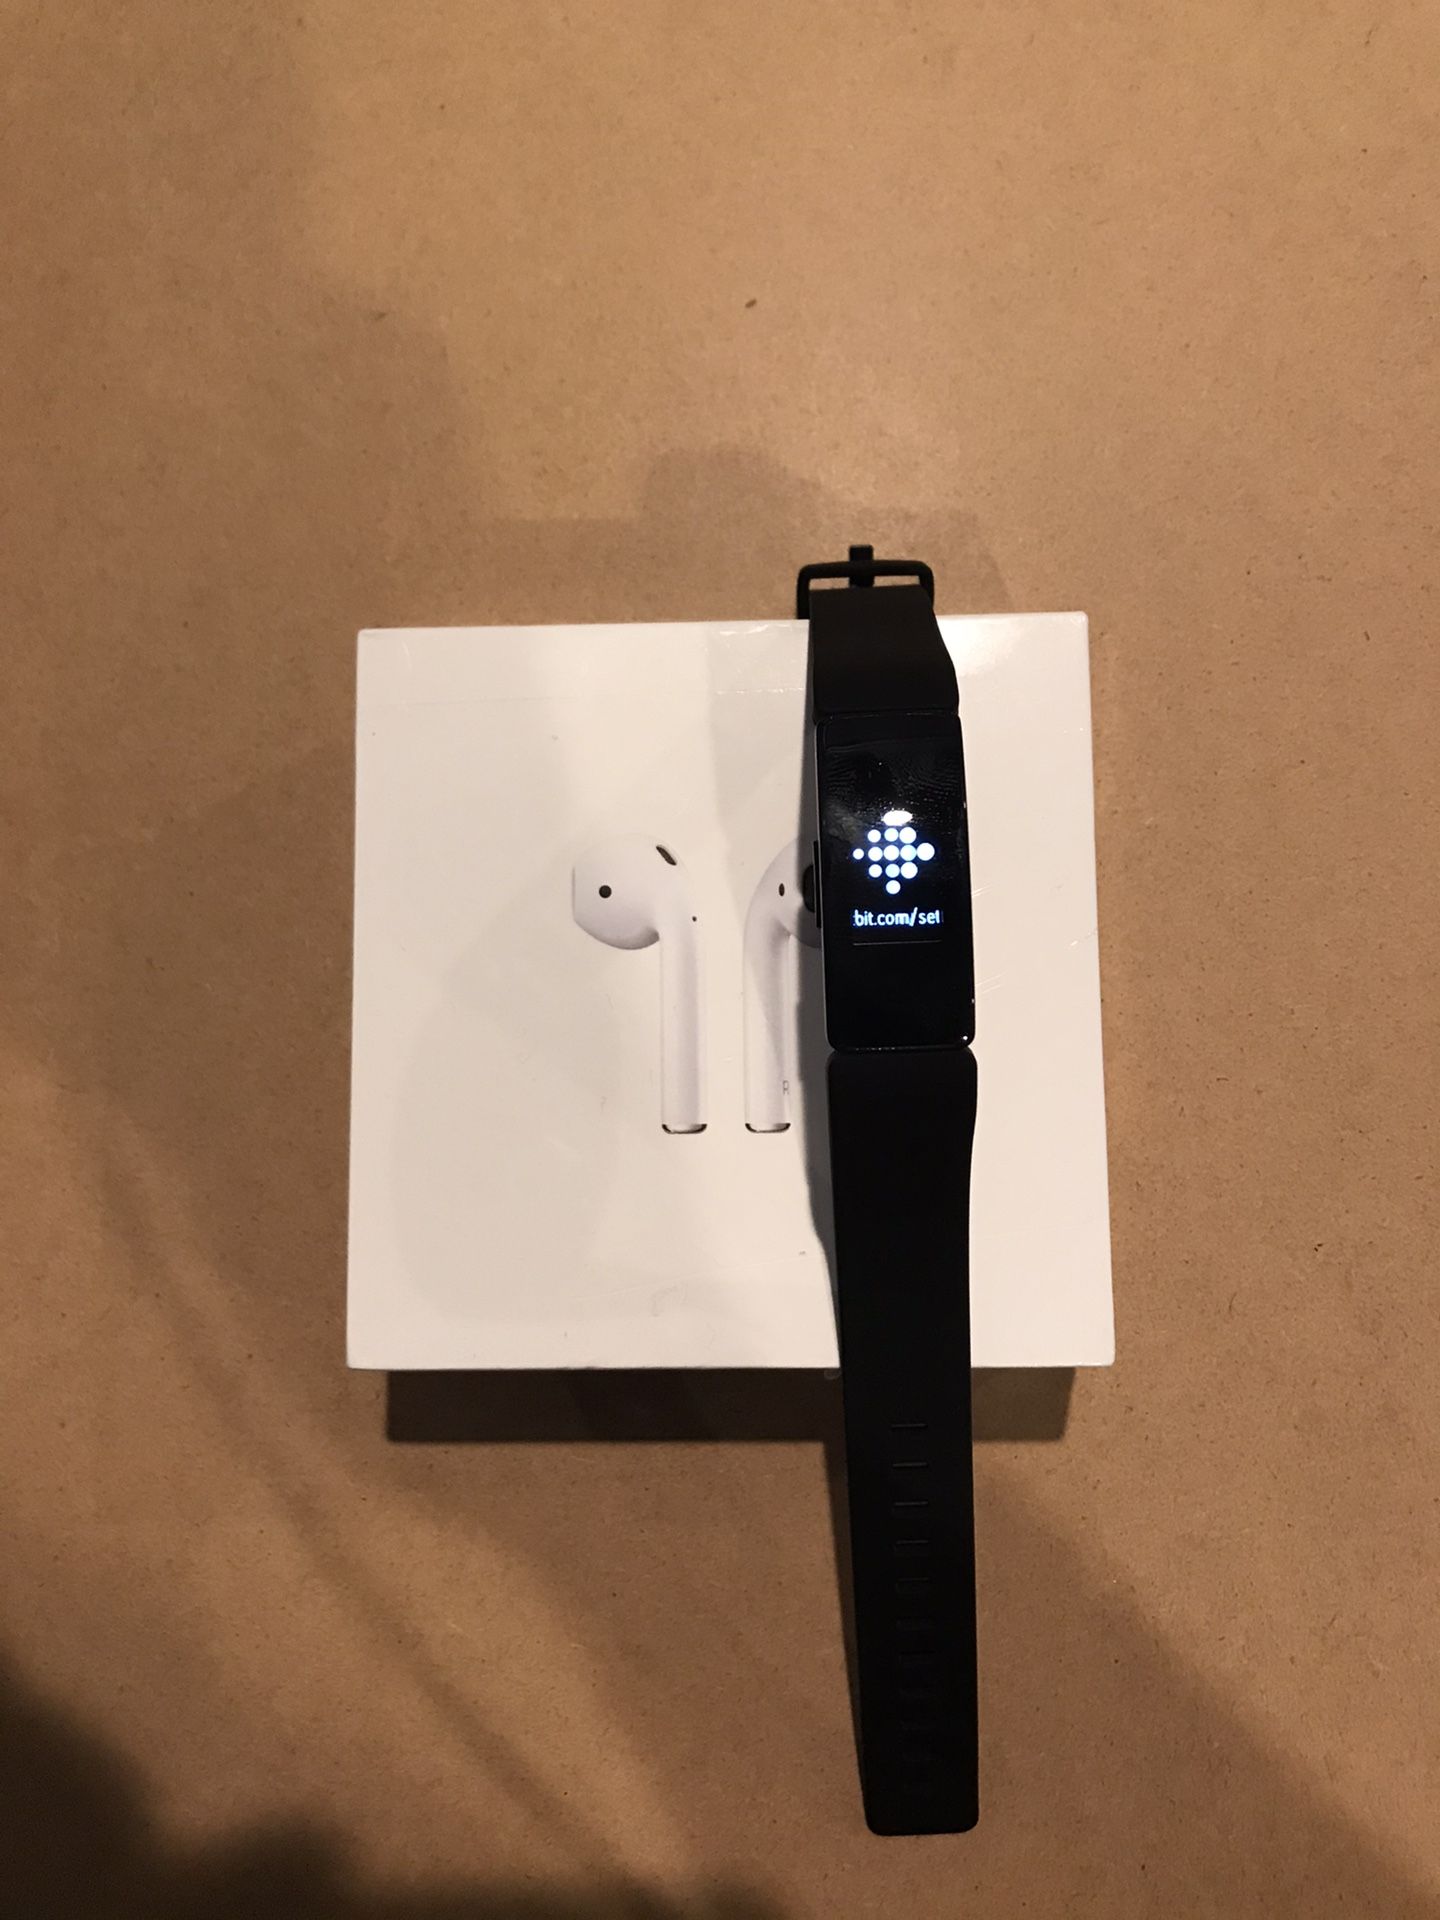 Apple AirPods Gen 2 and Fitbit combo deal!